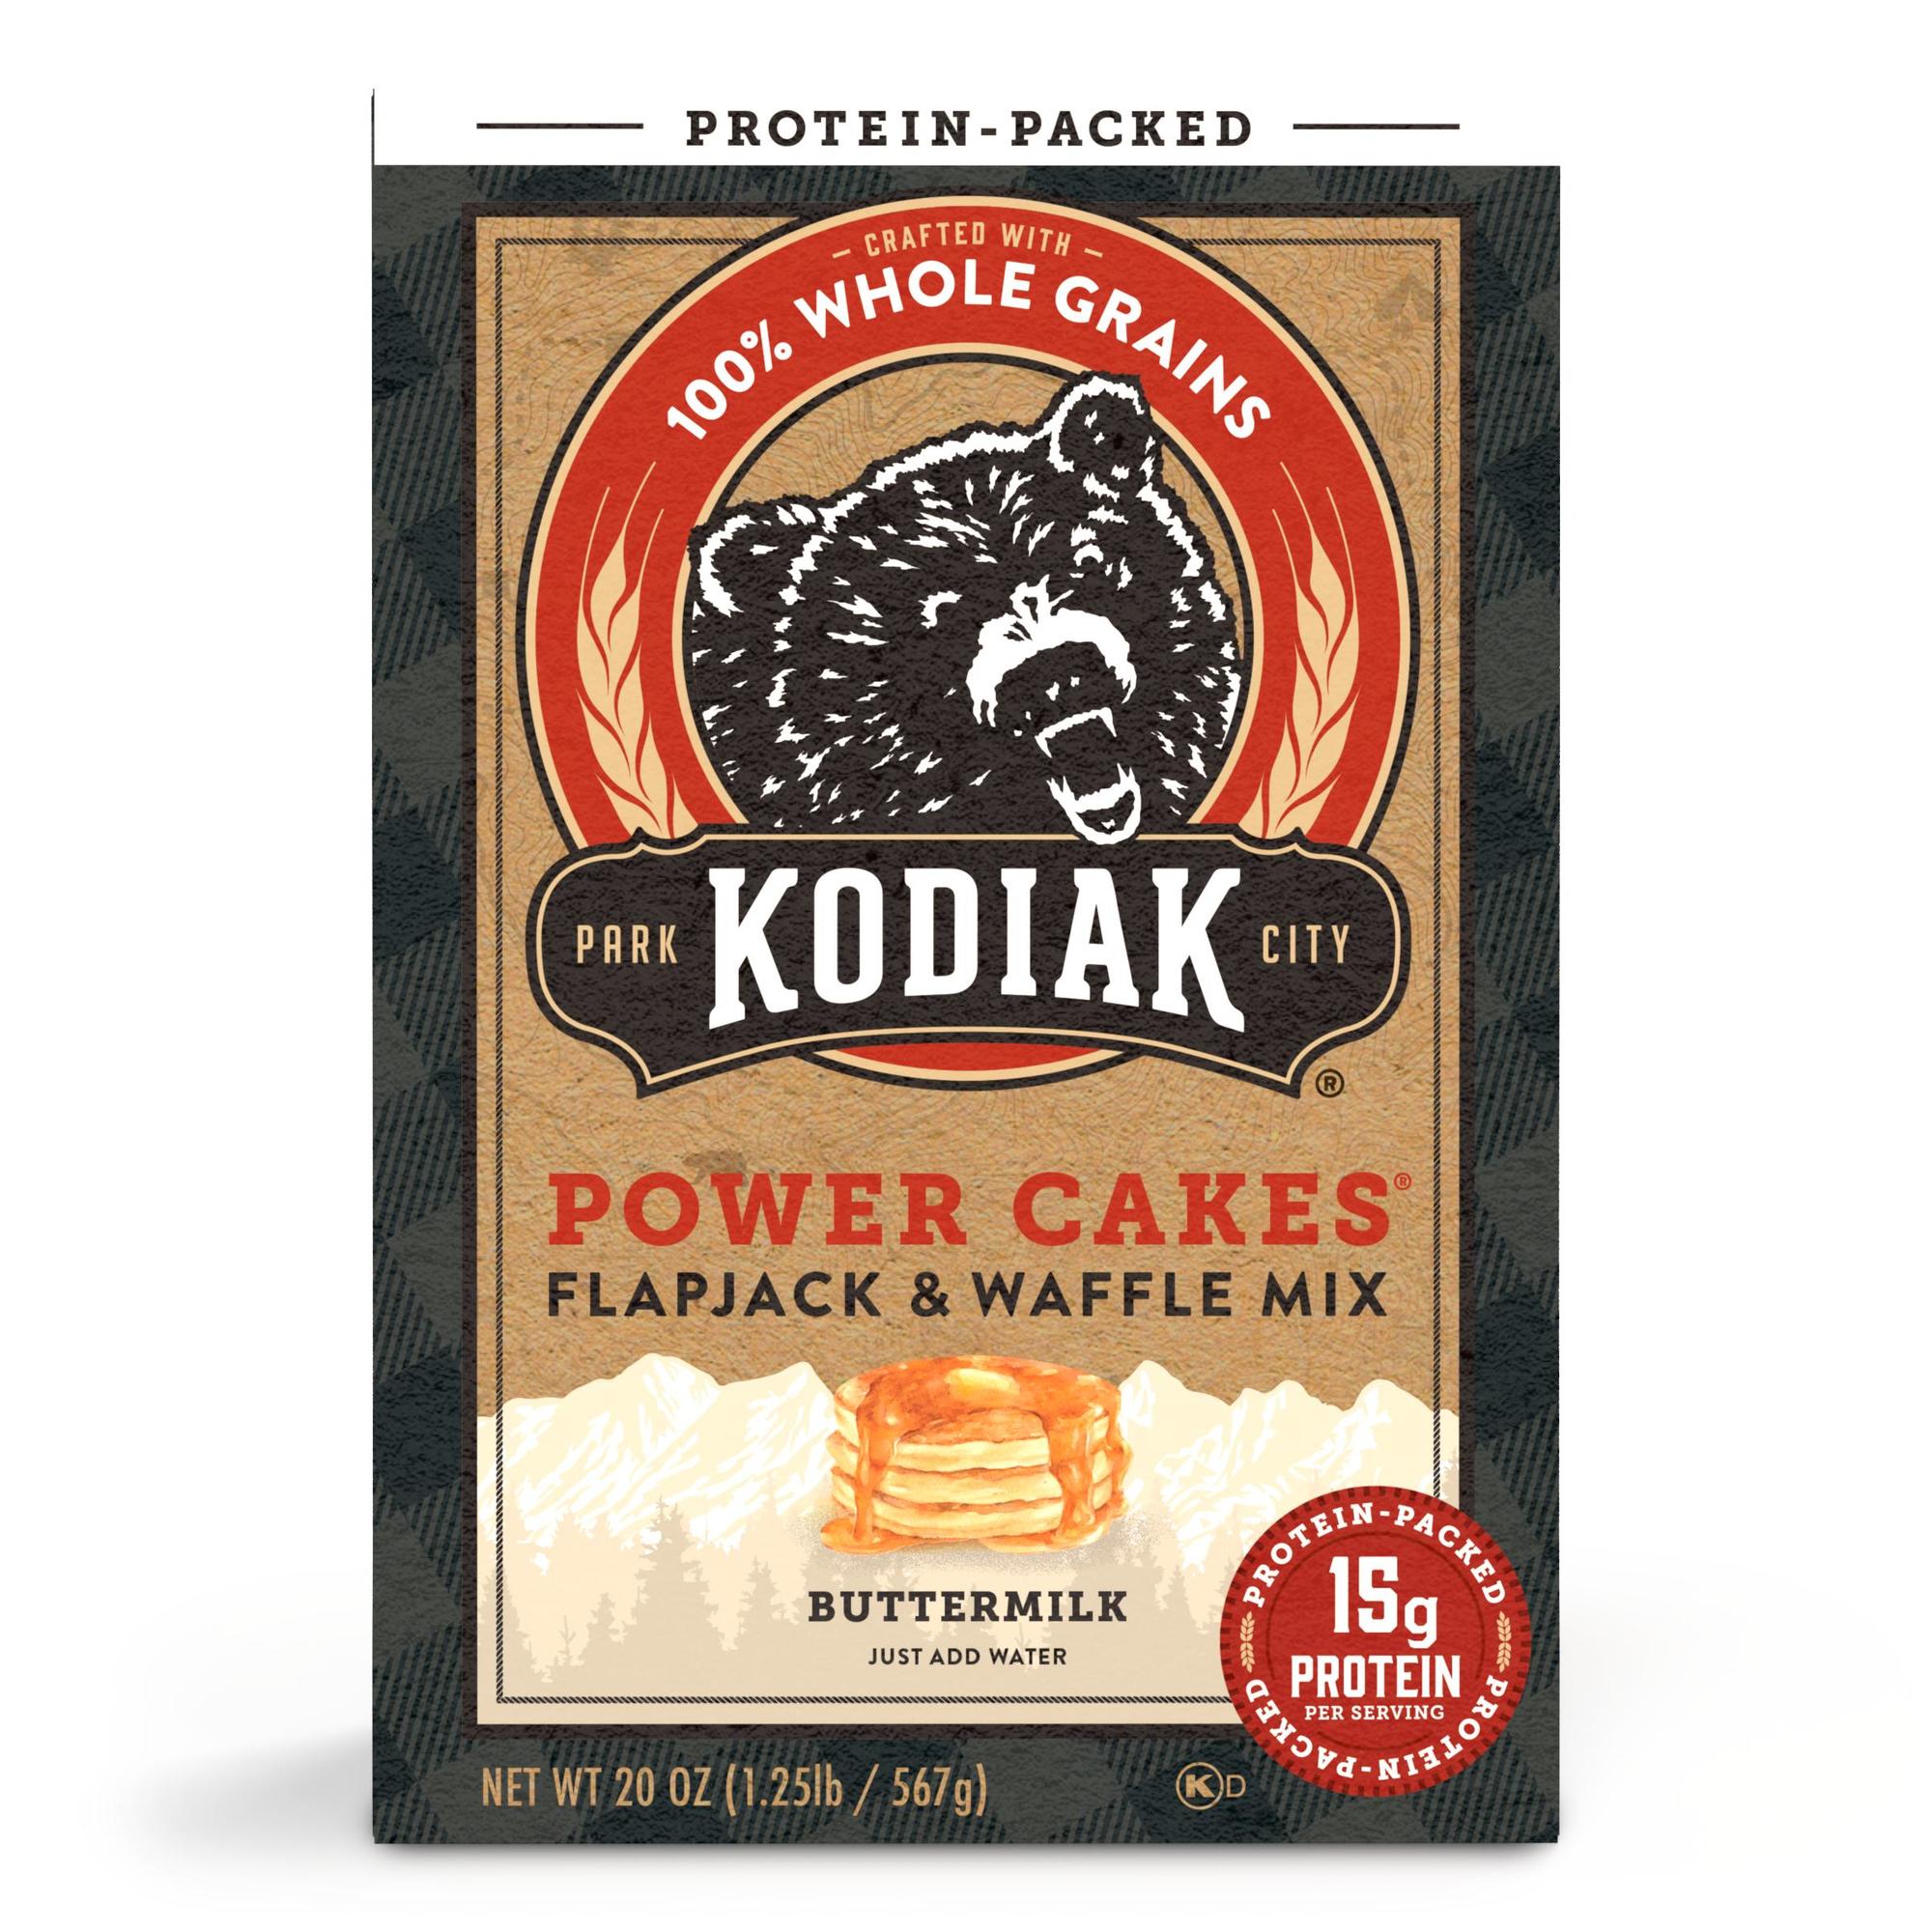 Kodiak Protein-Packed Power Cakes Buttermilk Flapjack and Waffle Mix, 20 oz Box - image 1 of 9